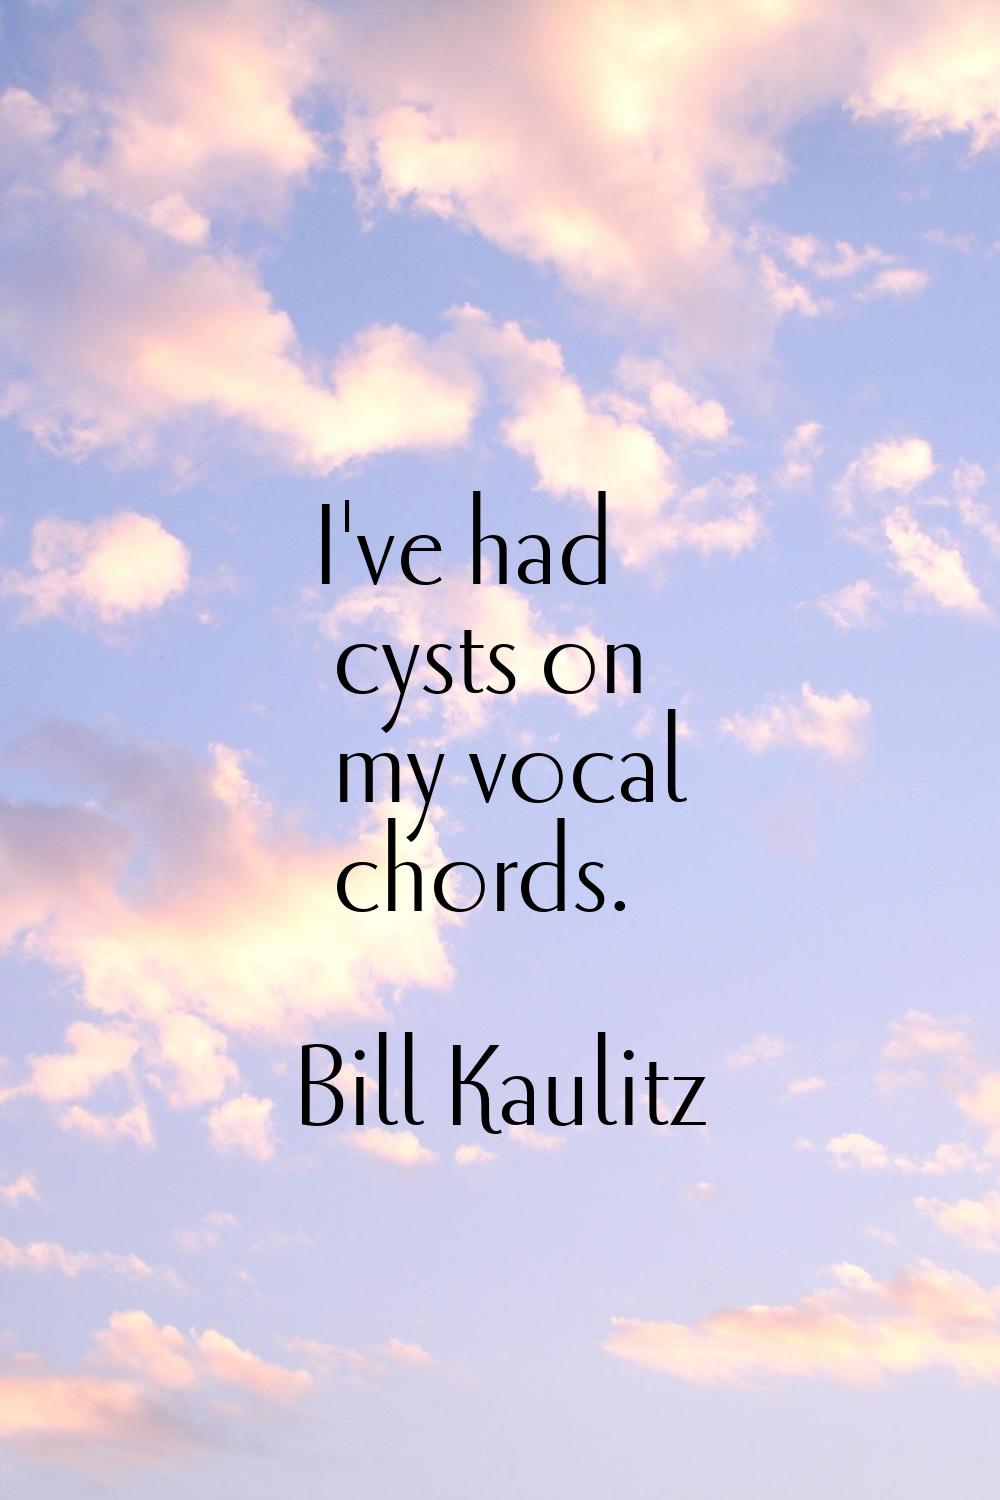 I've had cysts on my vocal chords.